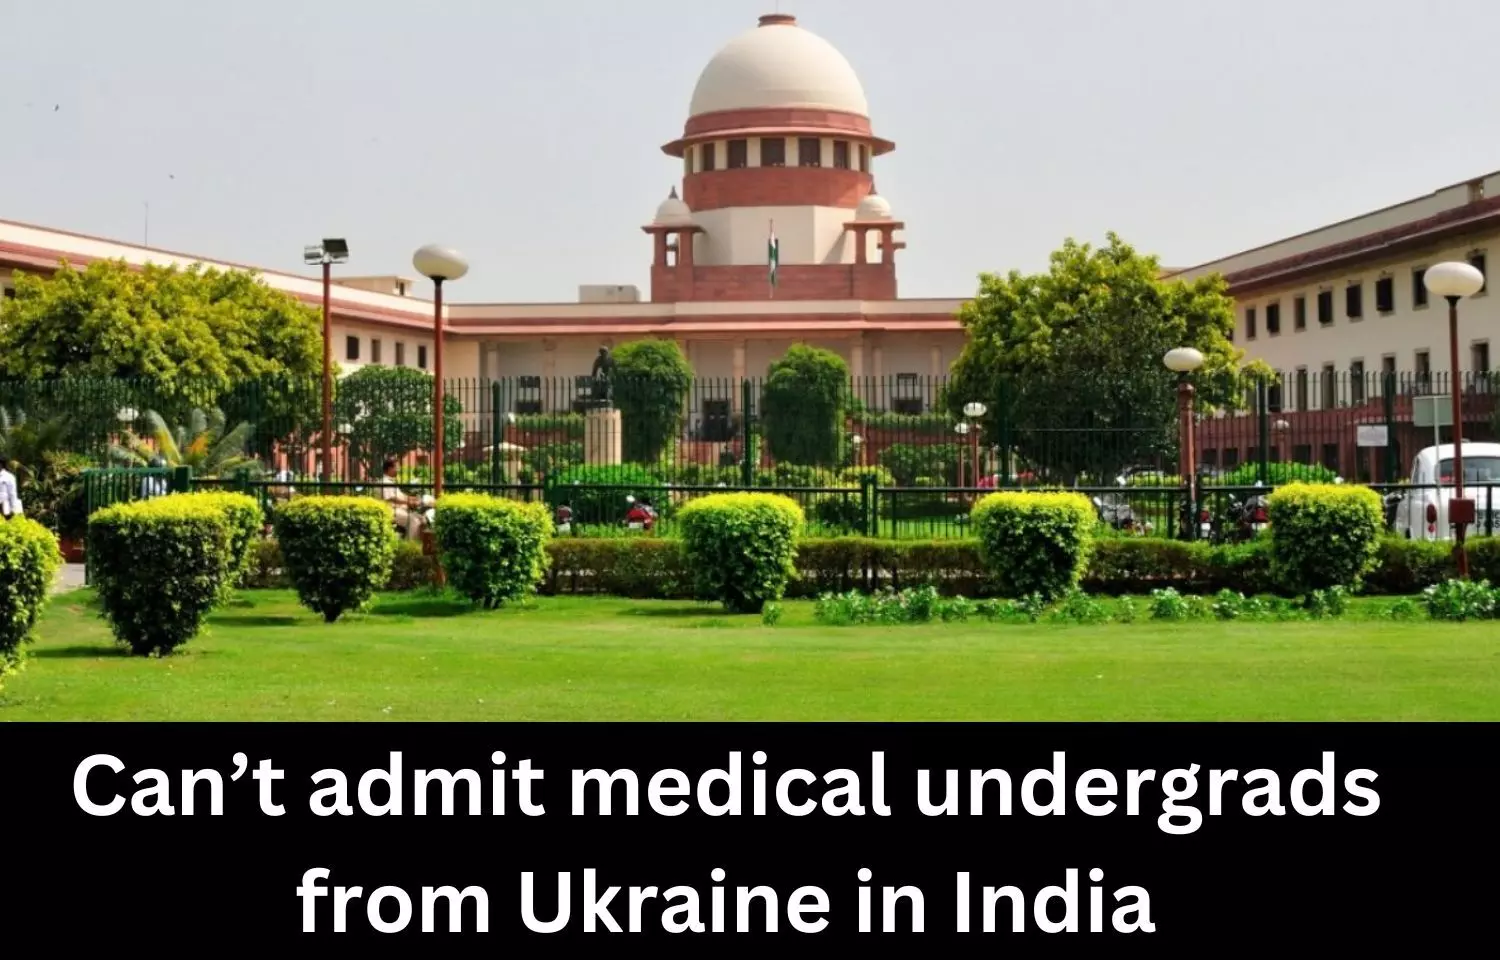 Cannot admit medical undergrads from Ukraine in Indian medical colleges: Govt to SC